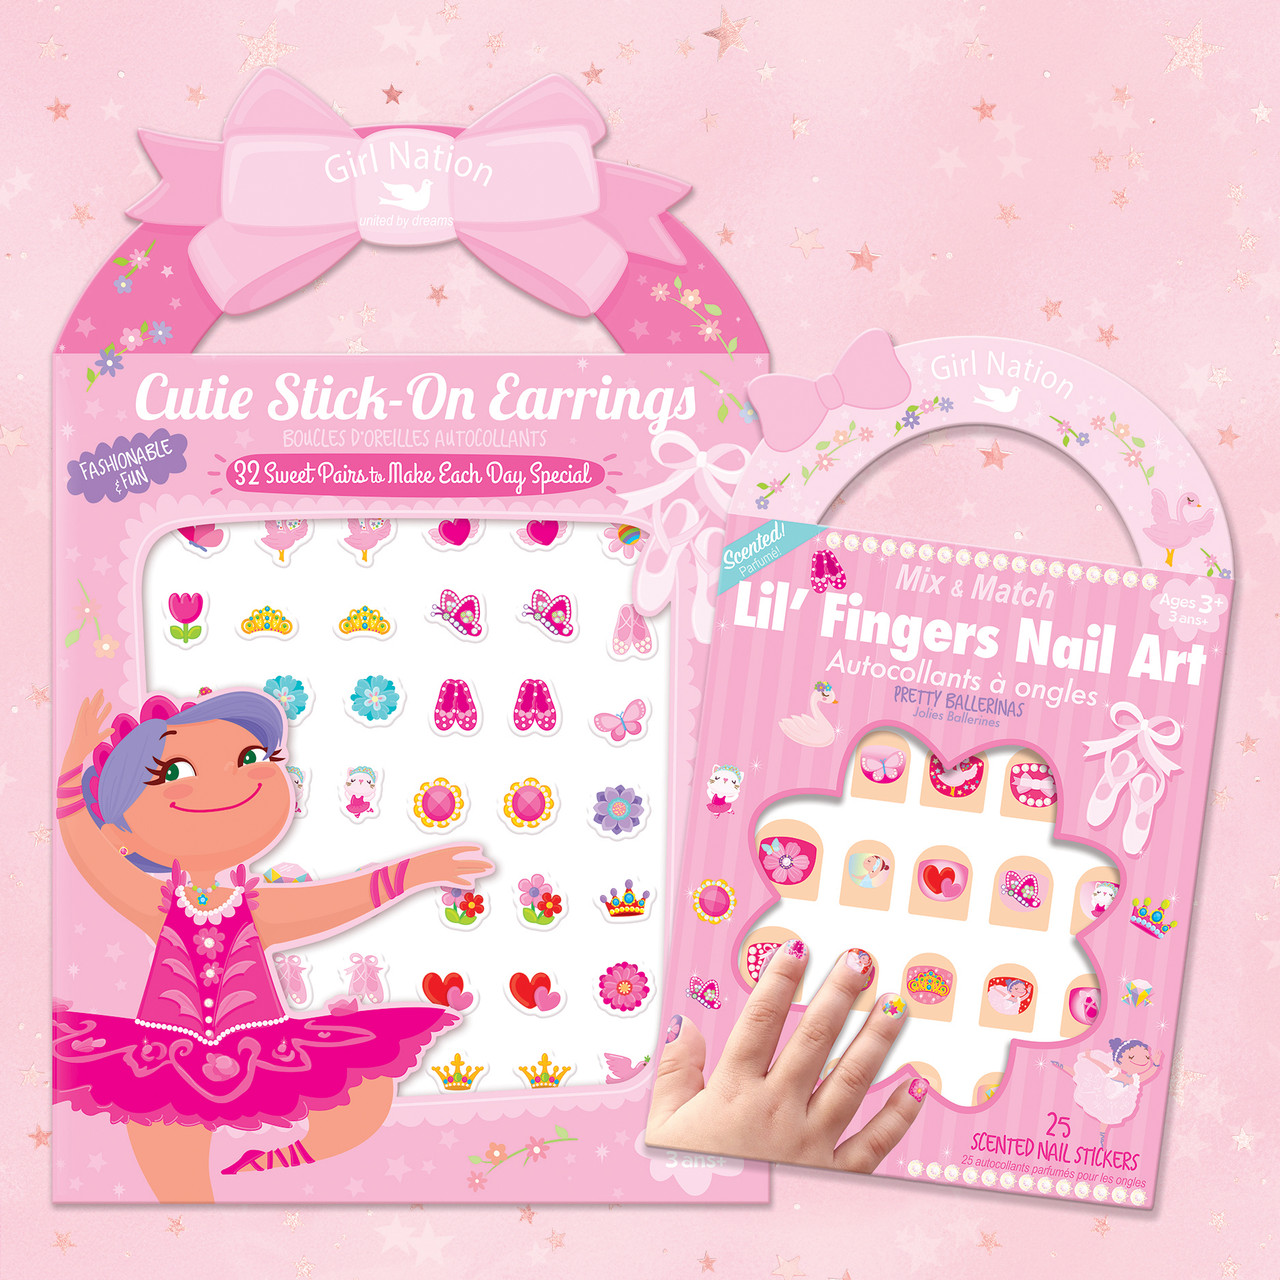 Cutie Stick-On Earring and Nail Sticker Gift Set- Ballerinas